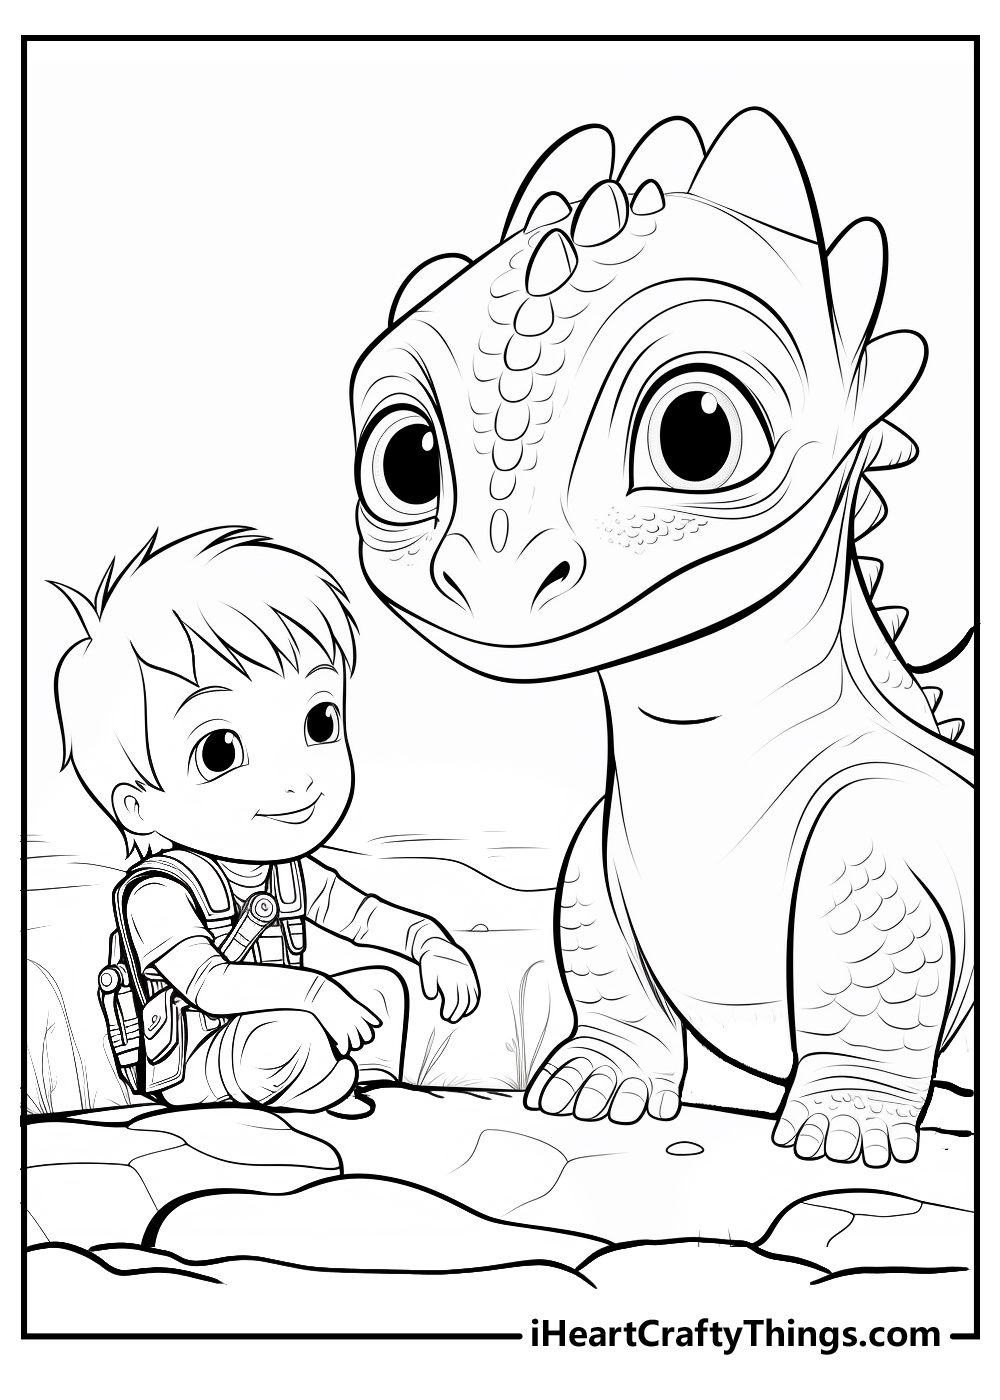 how to train your dragon coloring sheet for kids